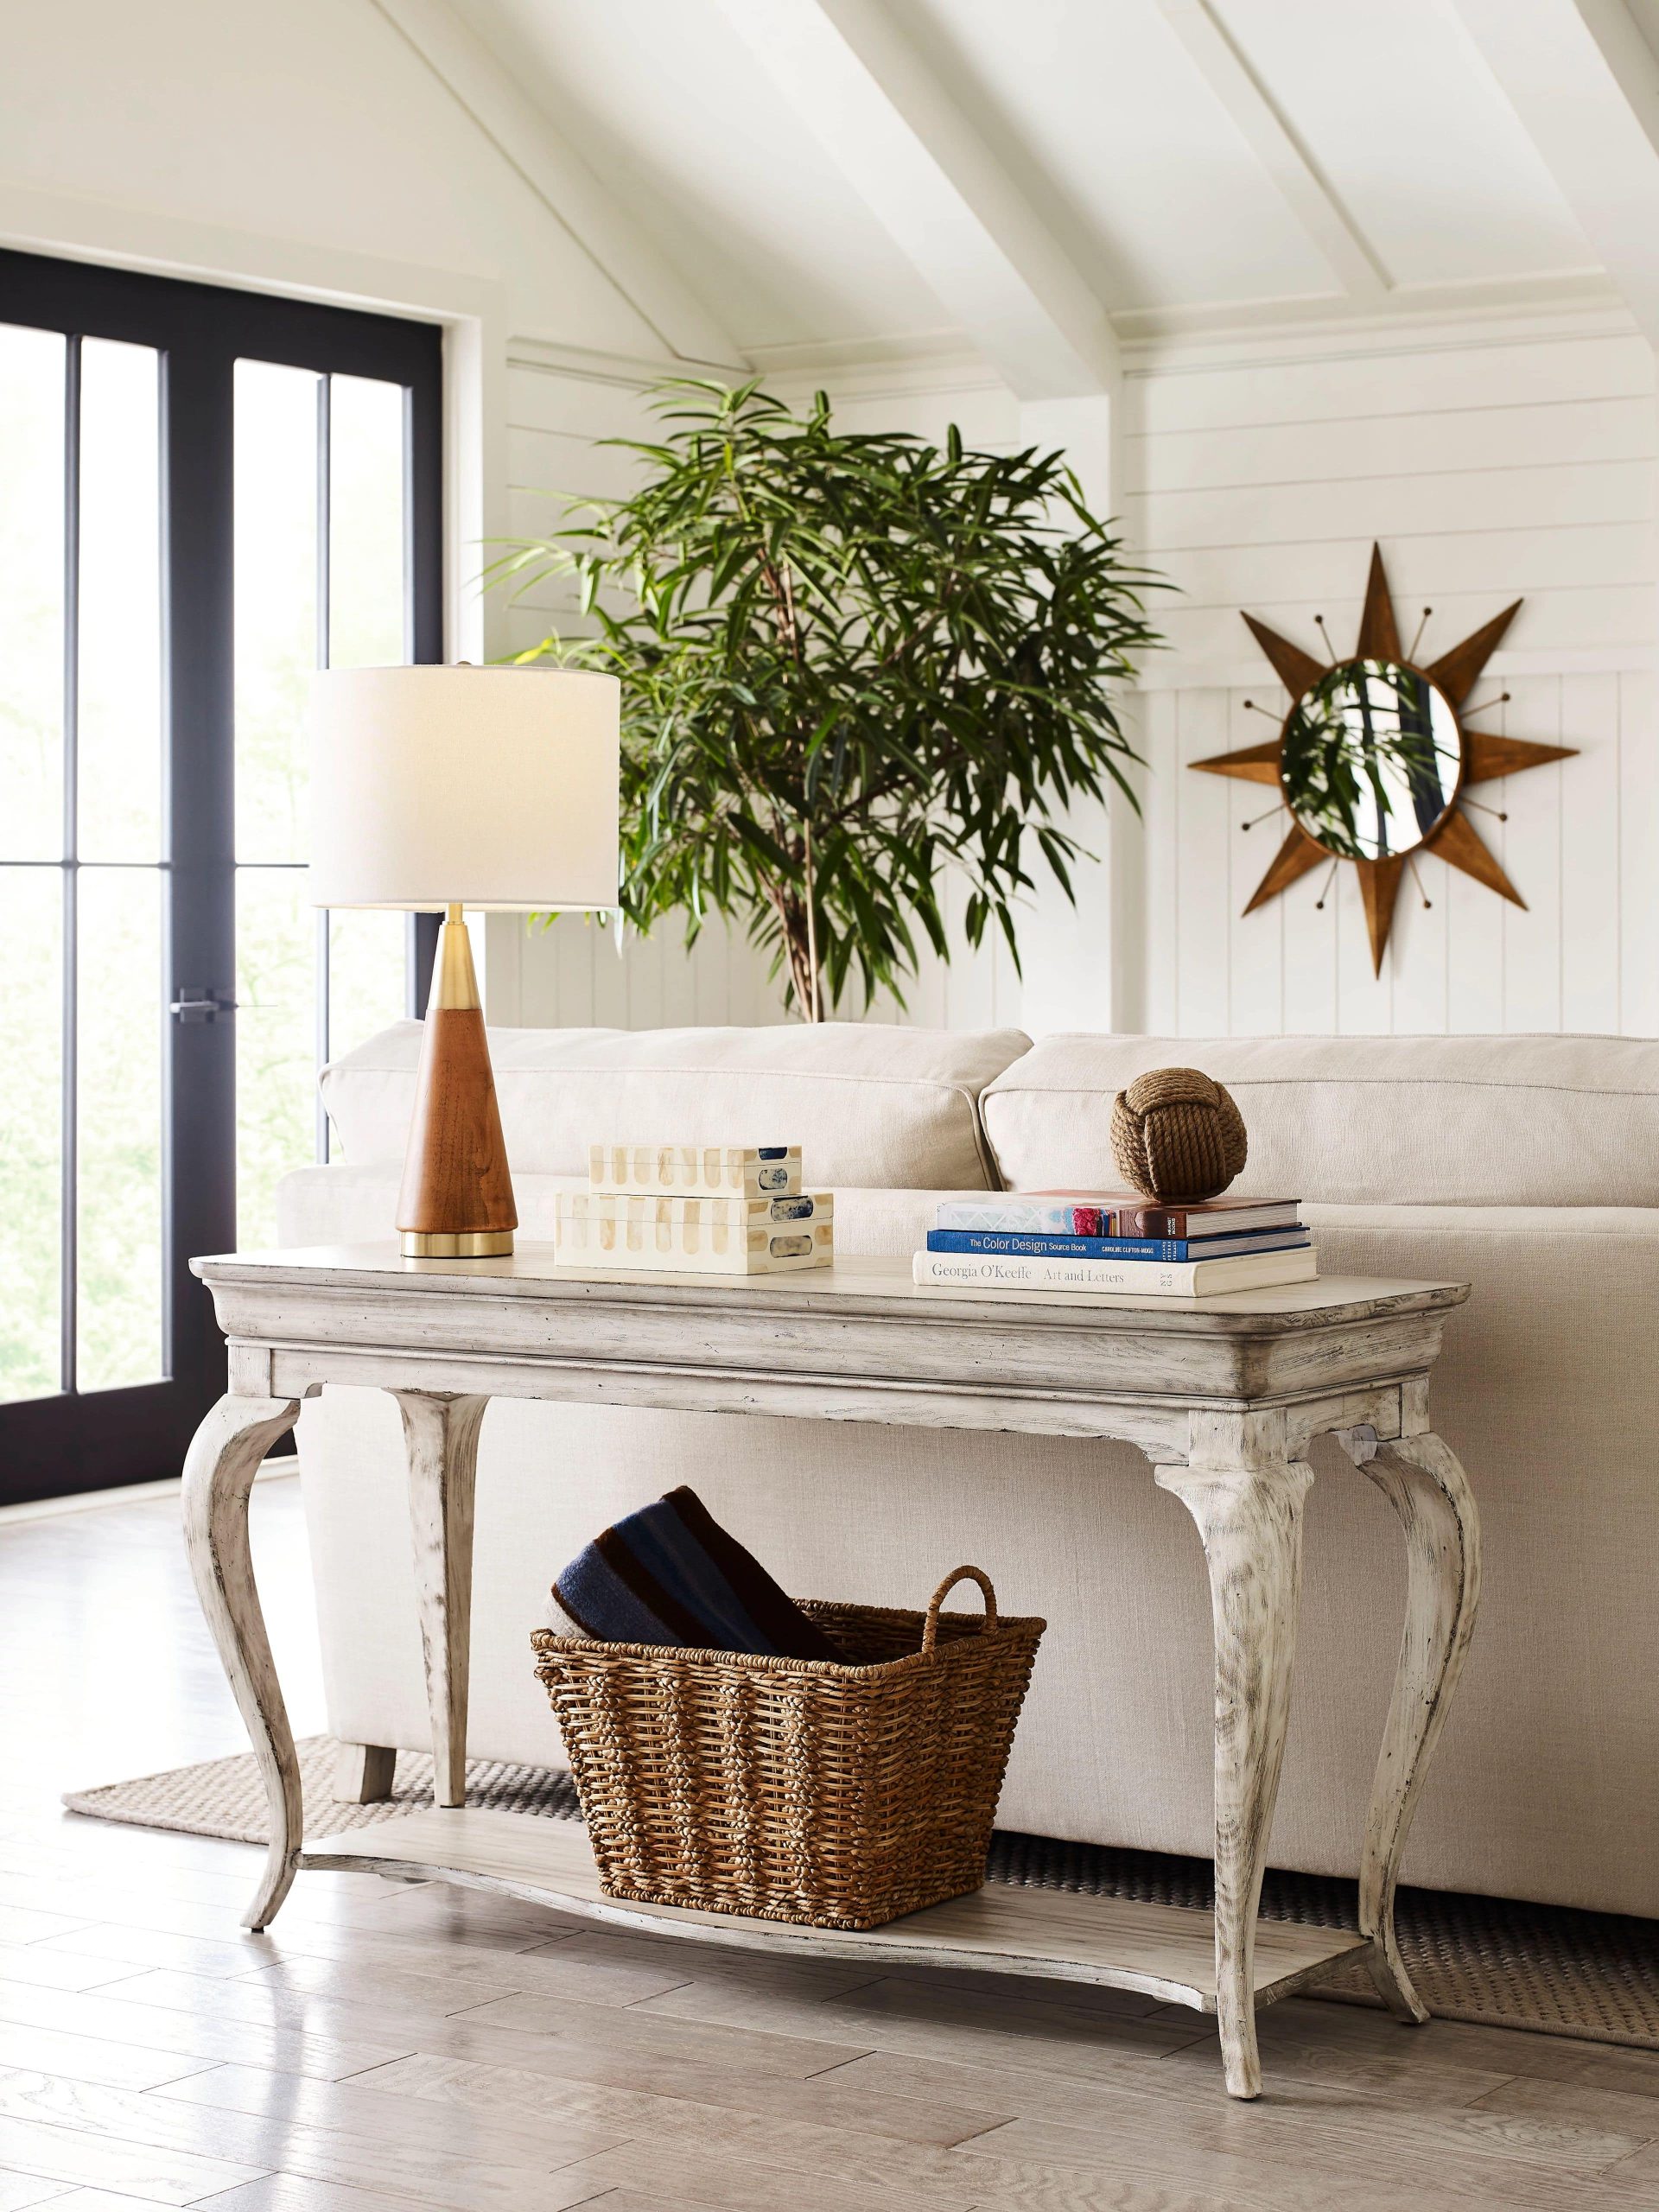 Cottage style furniture console from EF Brannon.